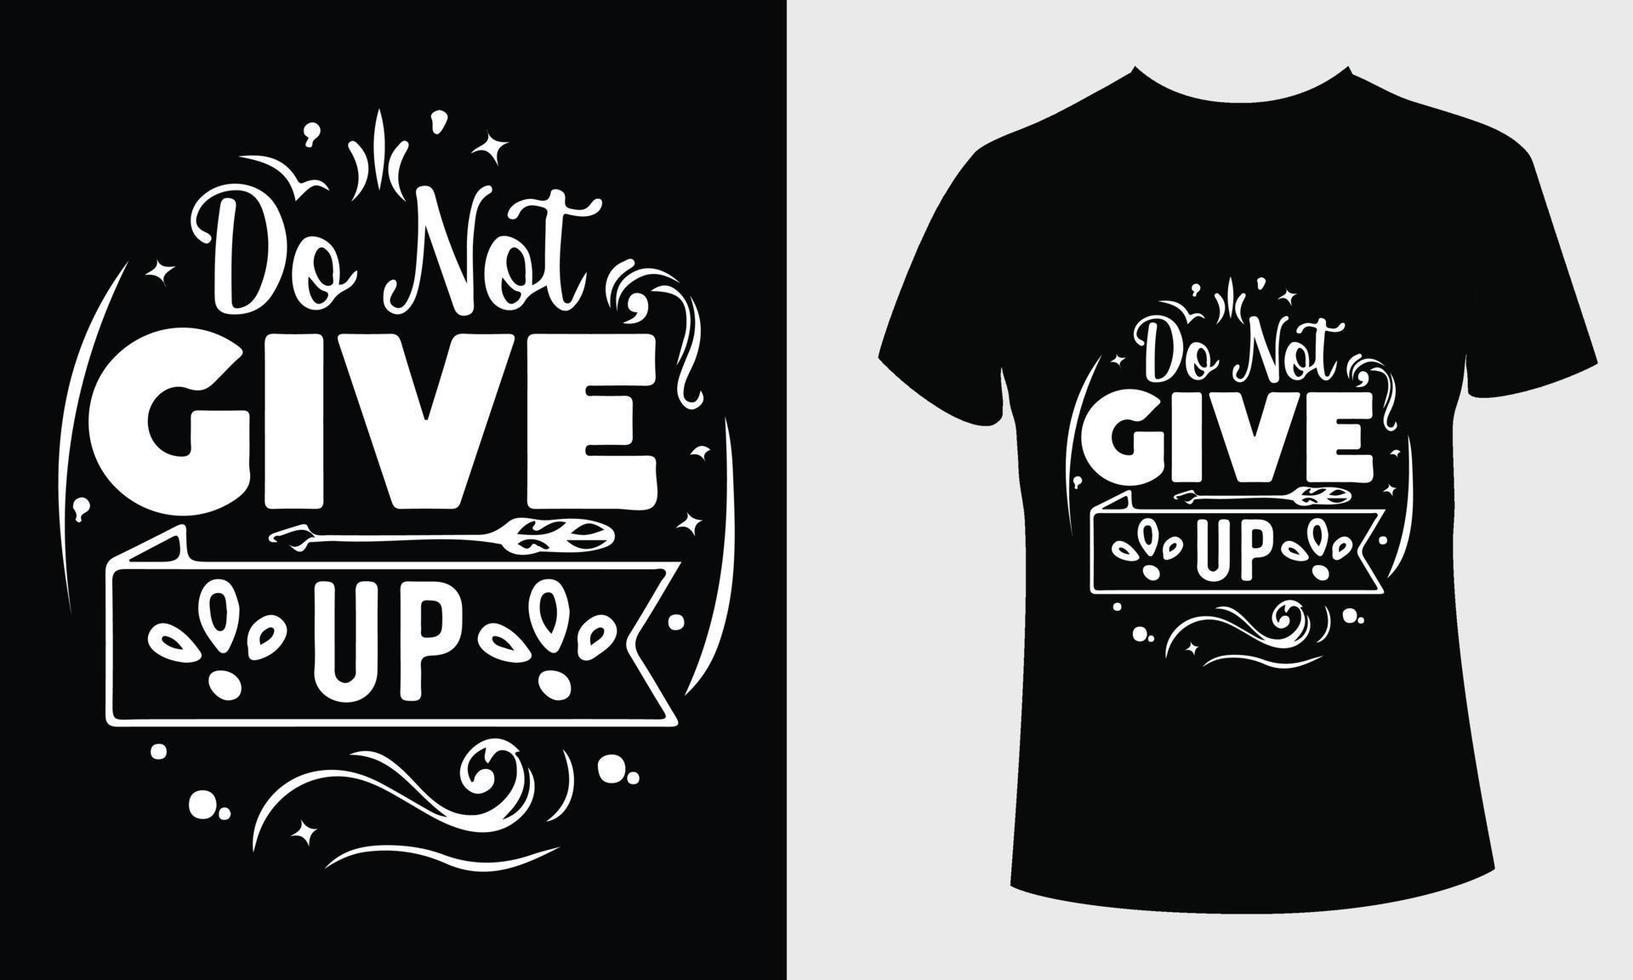 Do not give up quotes t shirt design vector